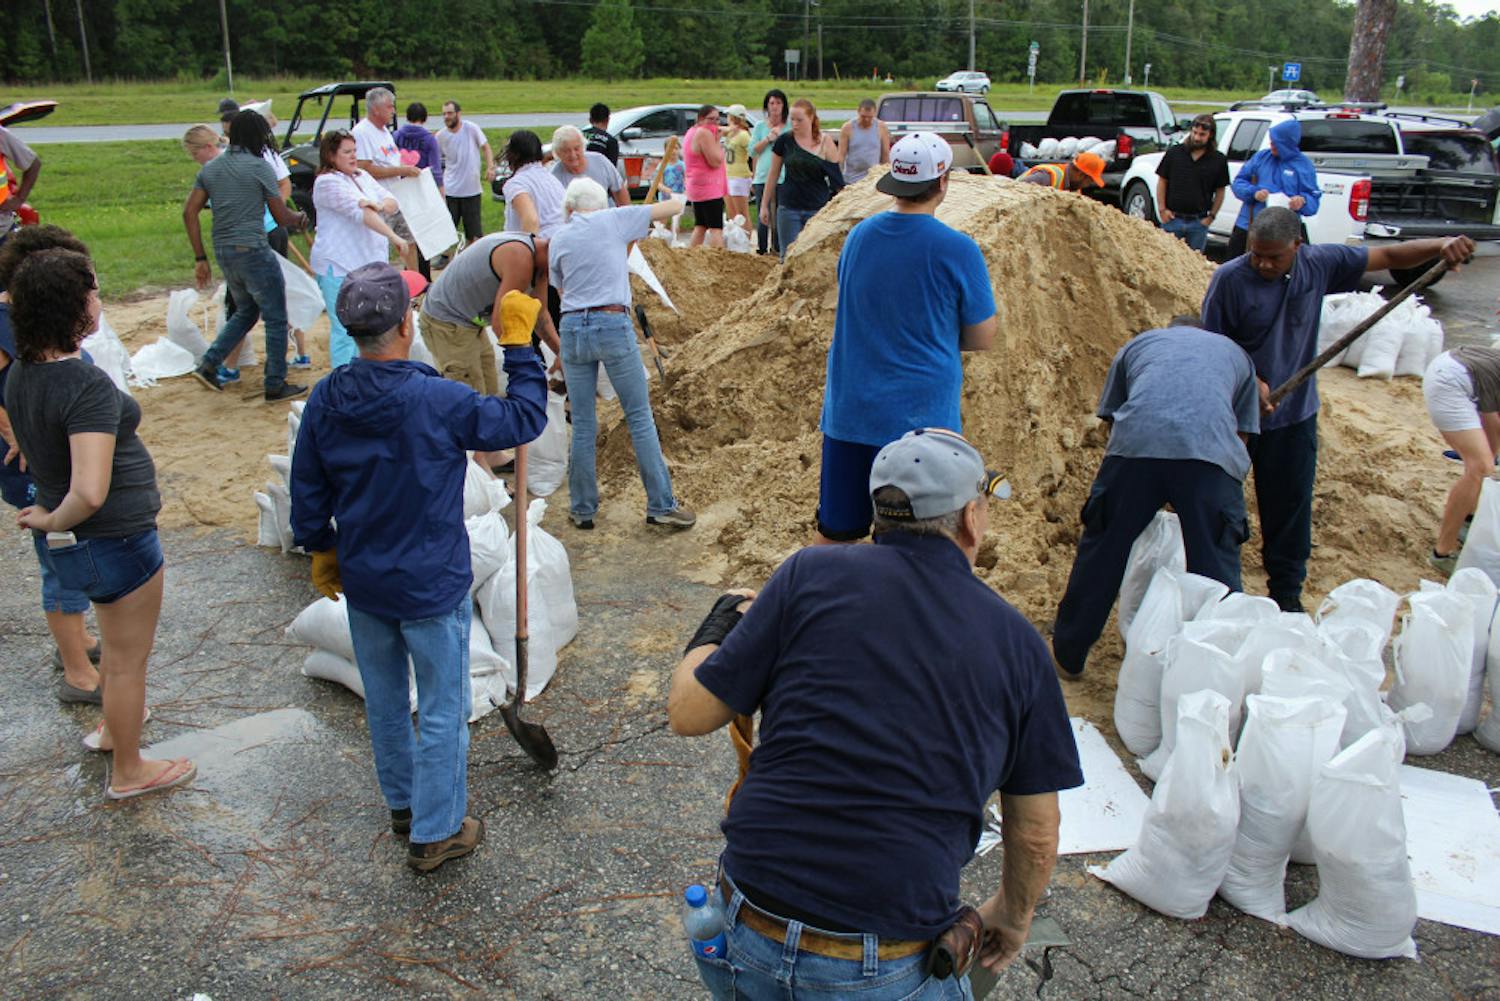 Alachua County residents work to fill sandbags to prepare for Hurricane Irma. Irma is currently ranked as a Category 5 hurricane and projections see it heading toward Florida. 